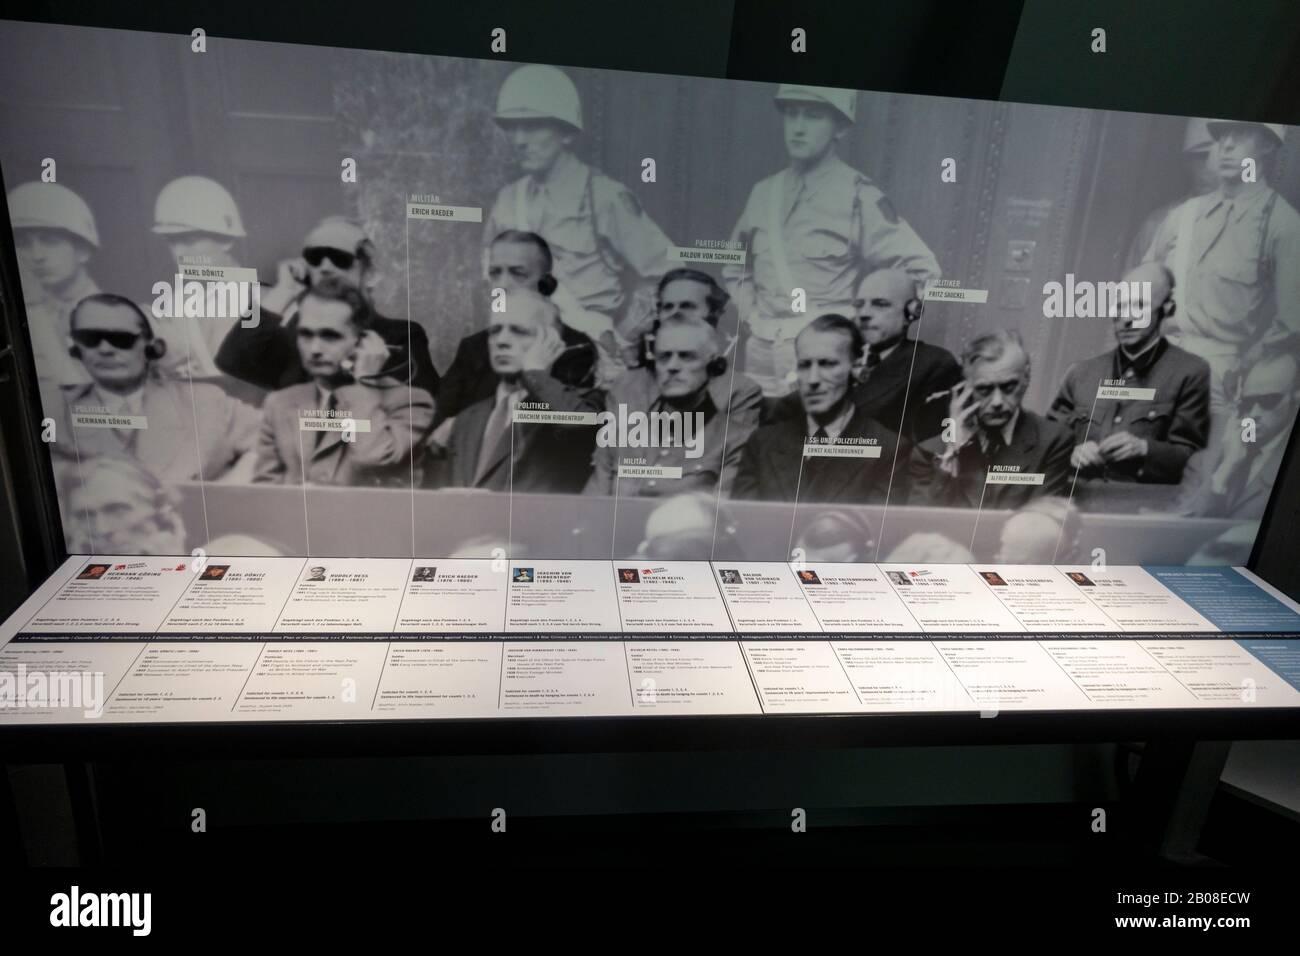 Display showing photograph of several of the accused at the Nuremberg Trials, Memorium Nuremberg Trials, Nuremberg, Bavaria, Germany. Stock Photo